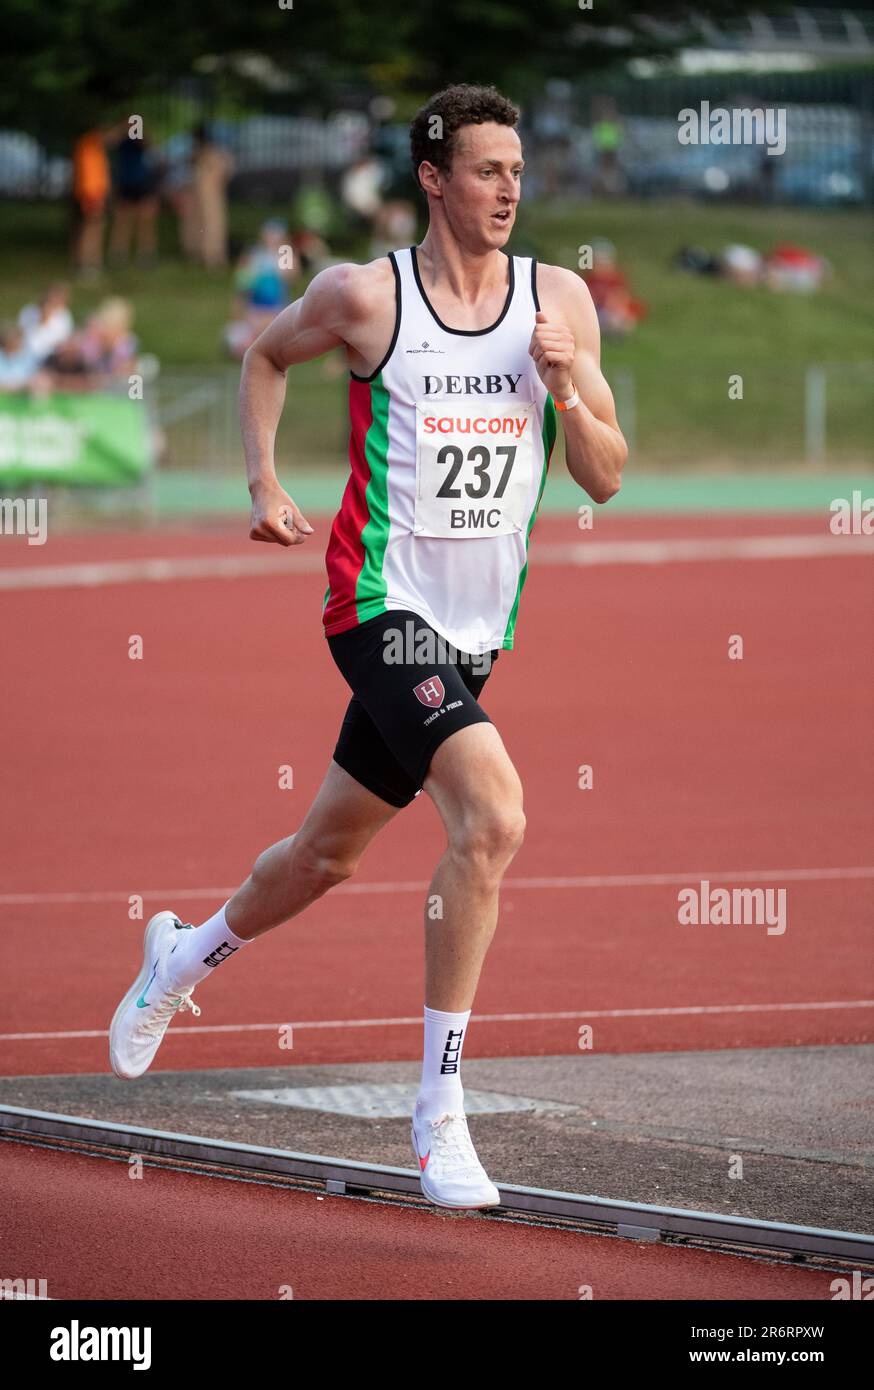 Hugo Milner of Derby AC competing in the men’s 5000m A race at the British Milers Club Grand Prix, Paula Ratcliffe Stadium, Loughborough, England UK o Stock Photo